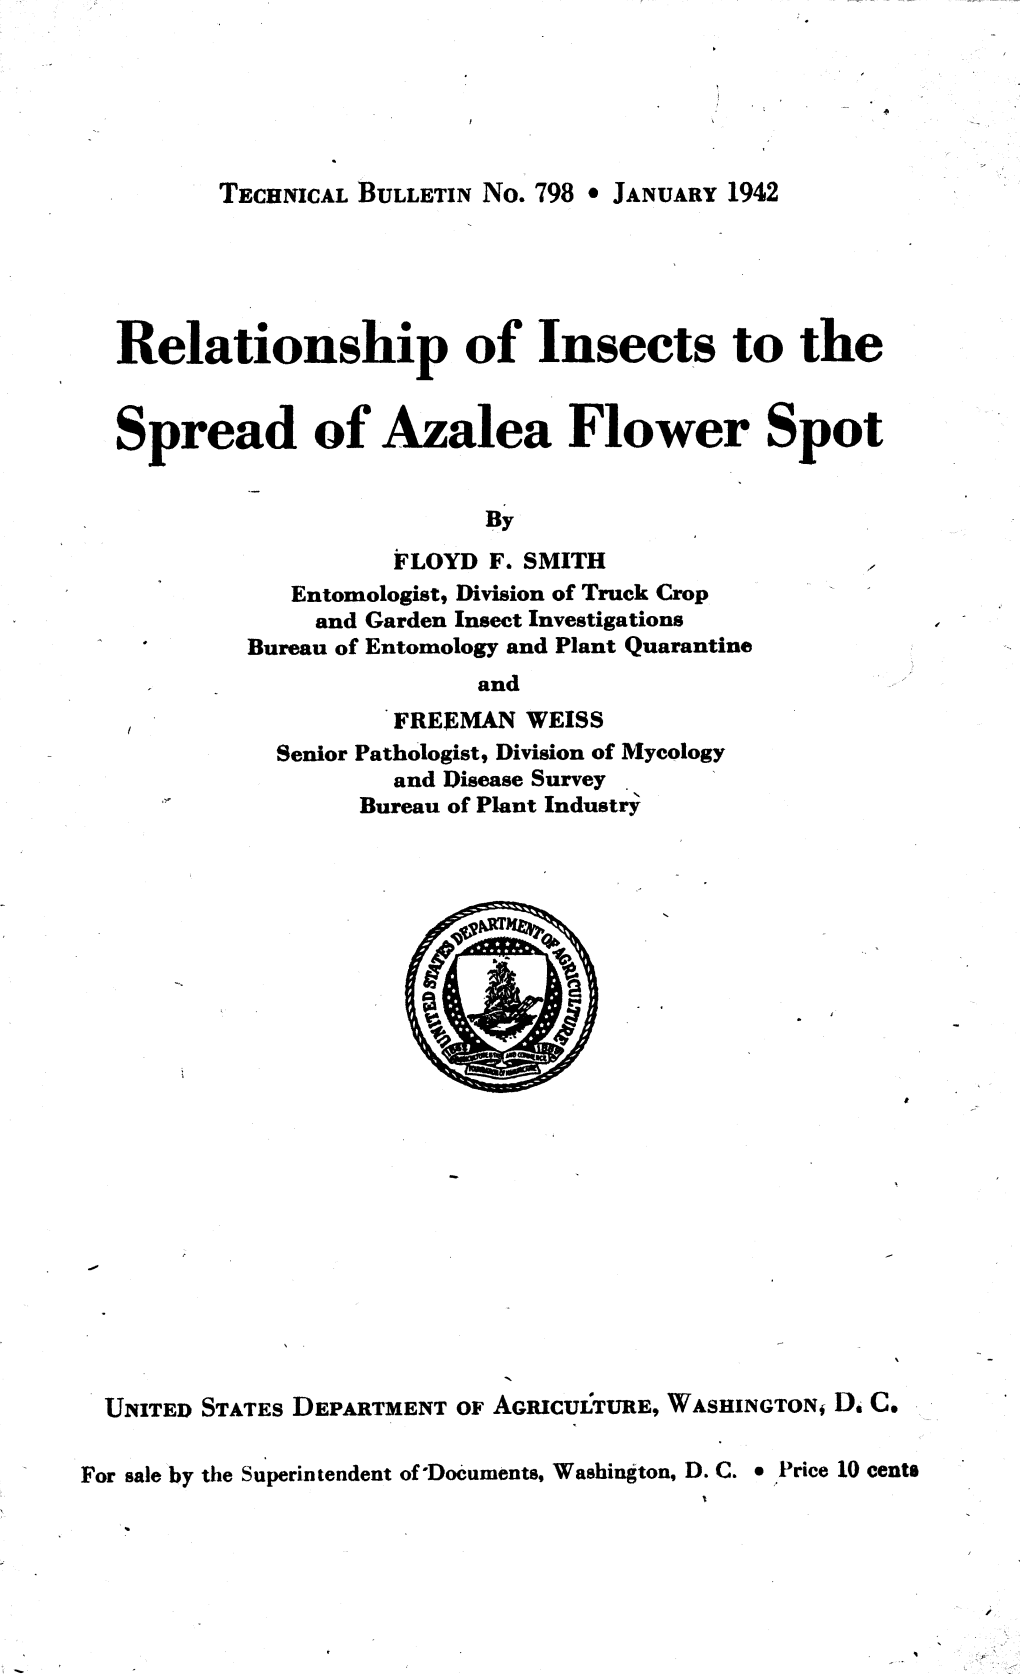 Relationship of Insects to the Spread of Azalea Flower Spot